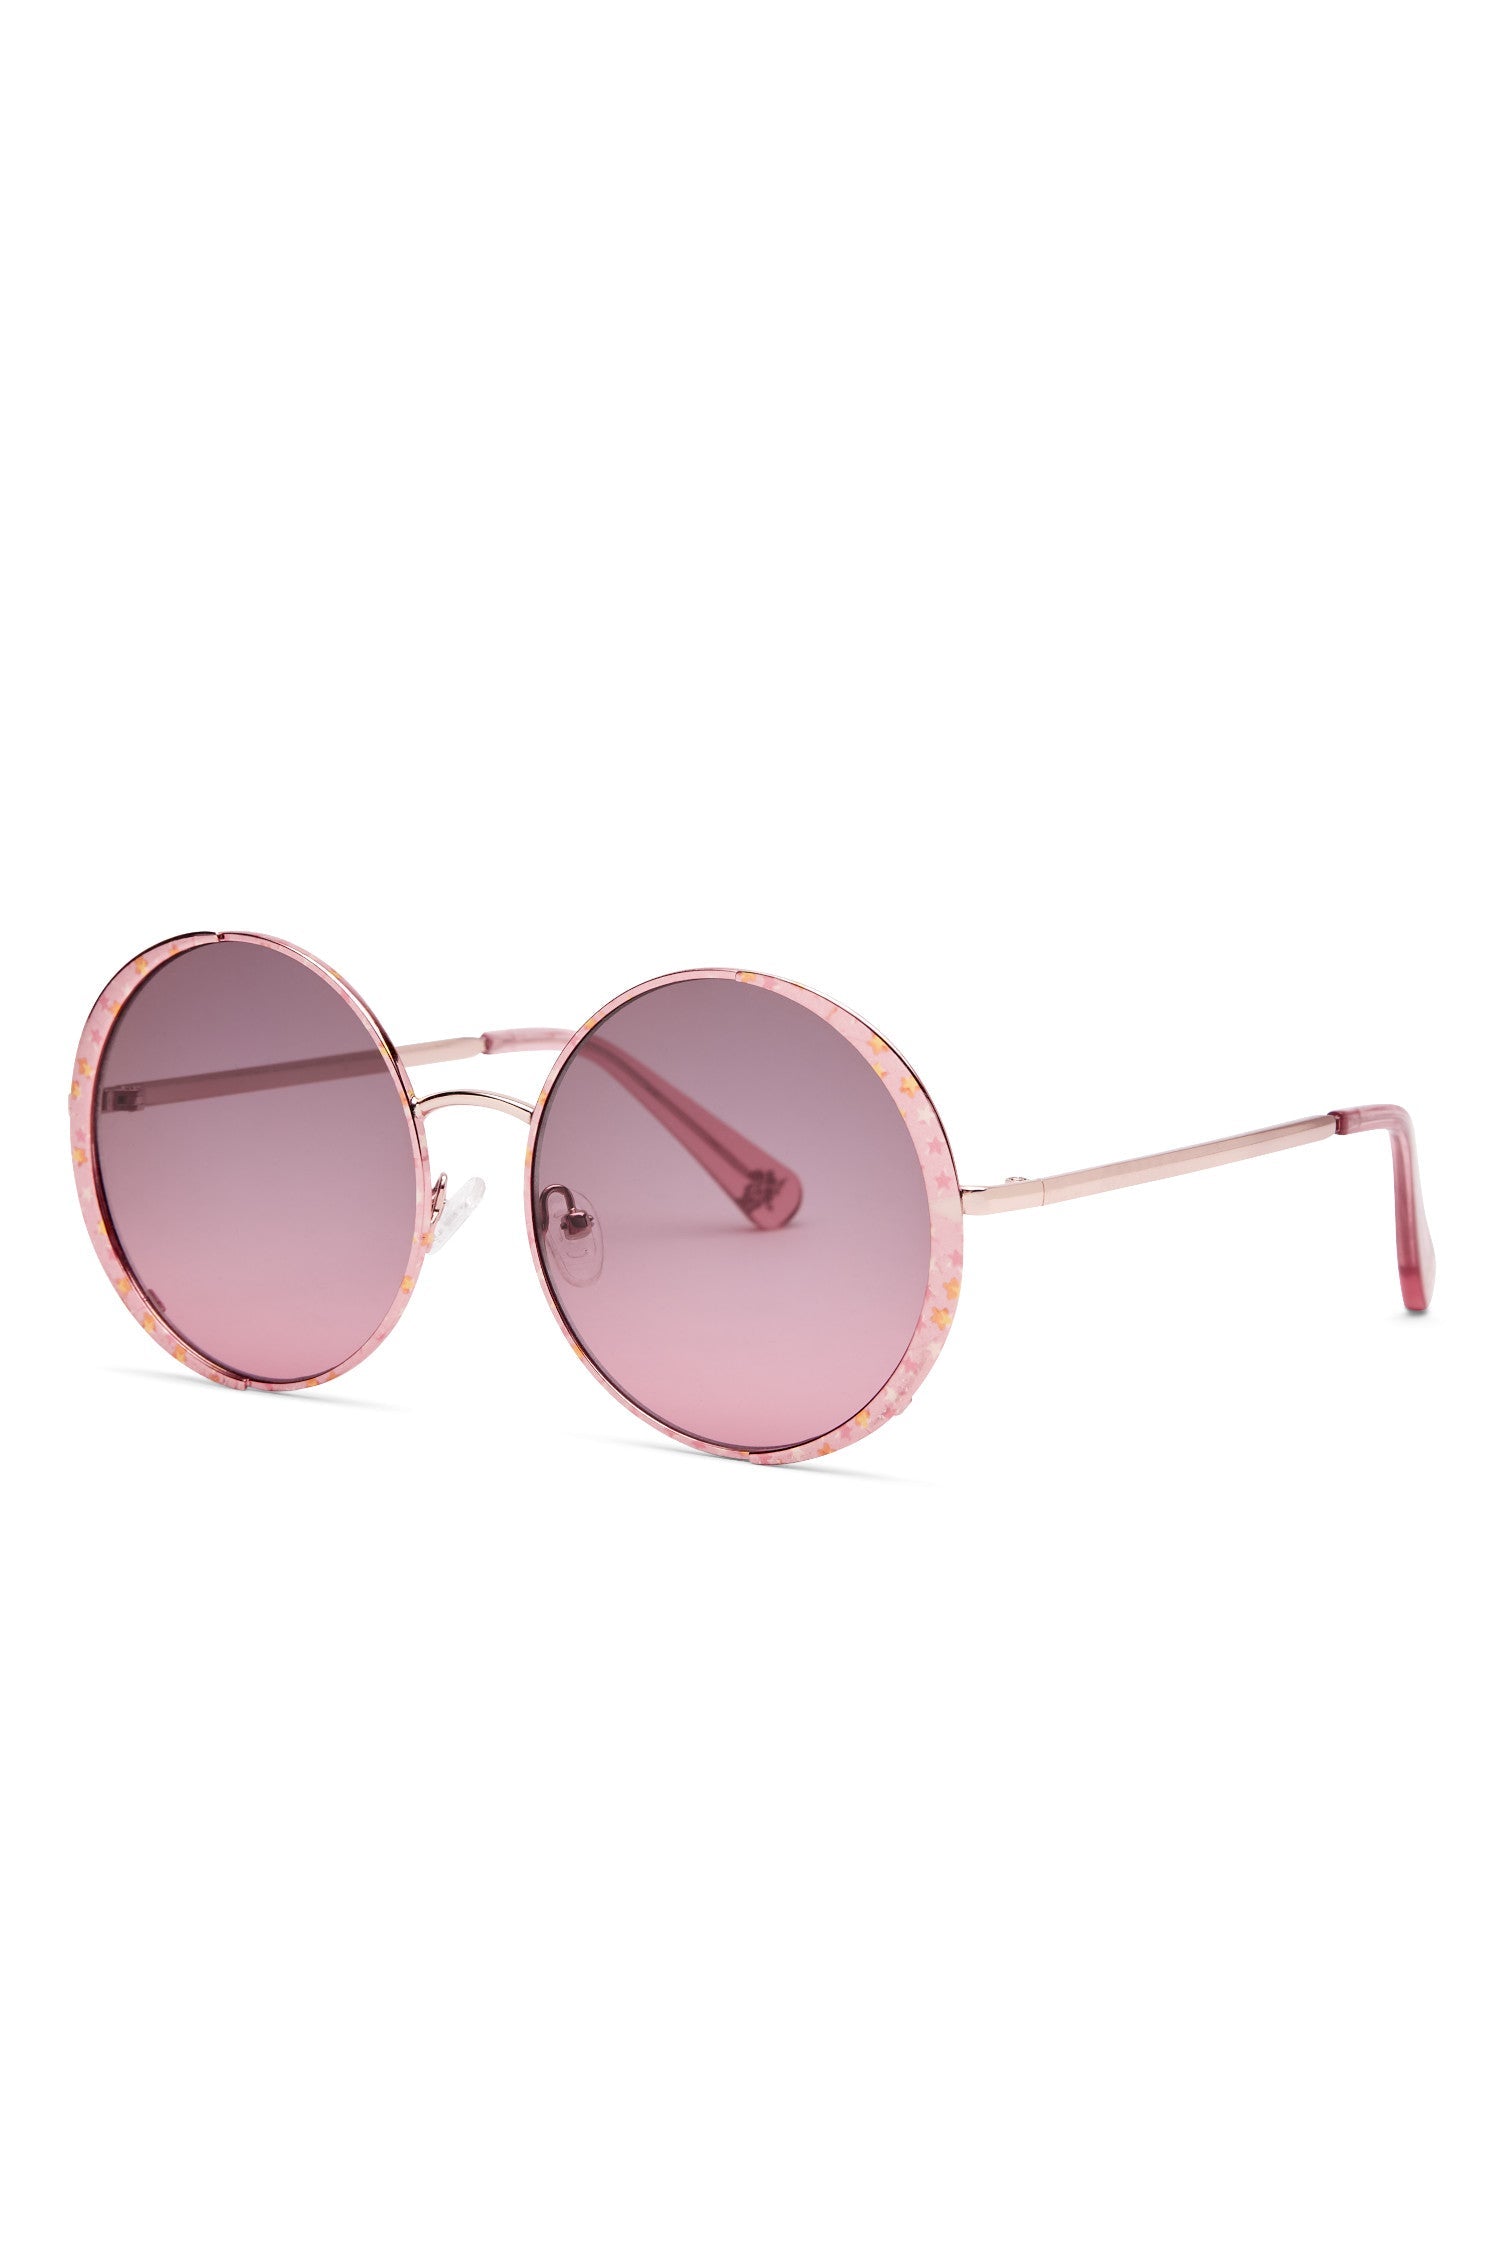 Womens round sunglasses with flower detailing